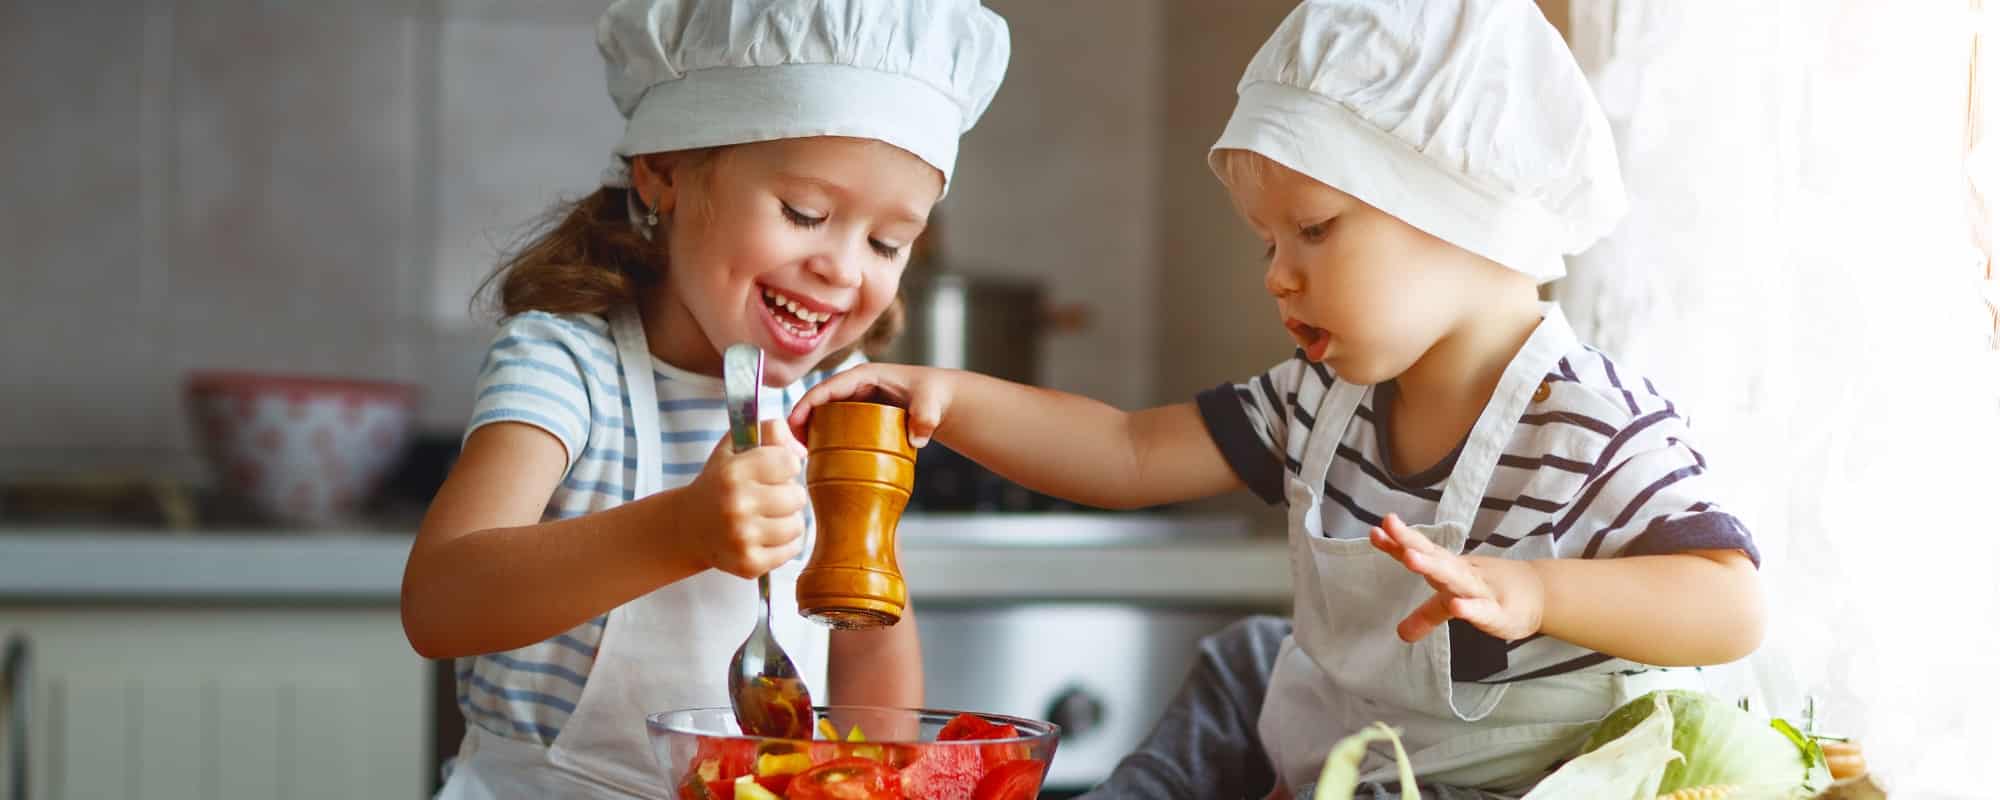 kids cook together fussy eating picky eaters fun healthy eating nutrition food aversion